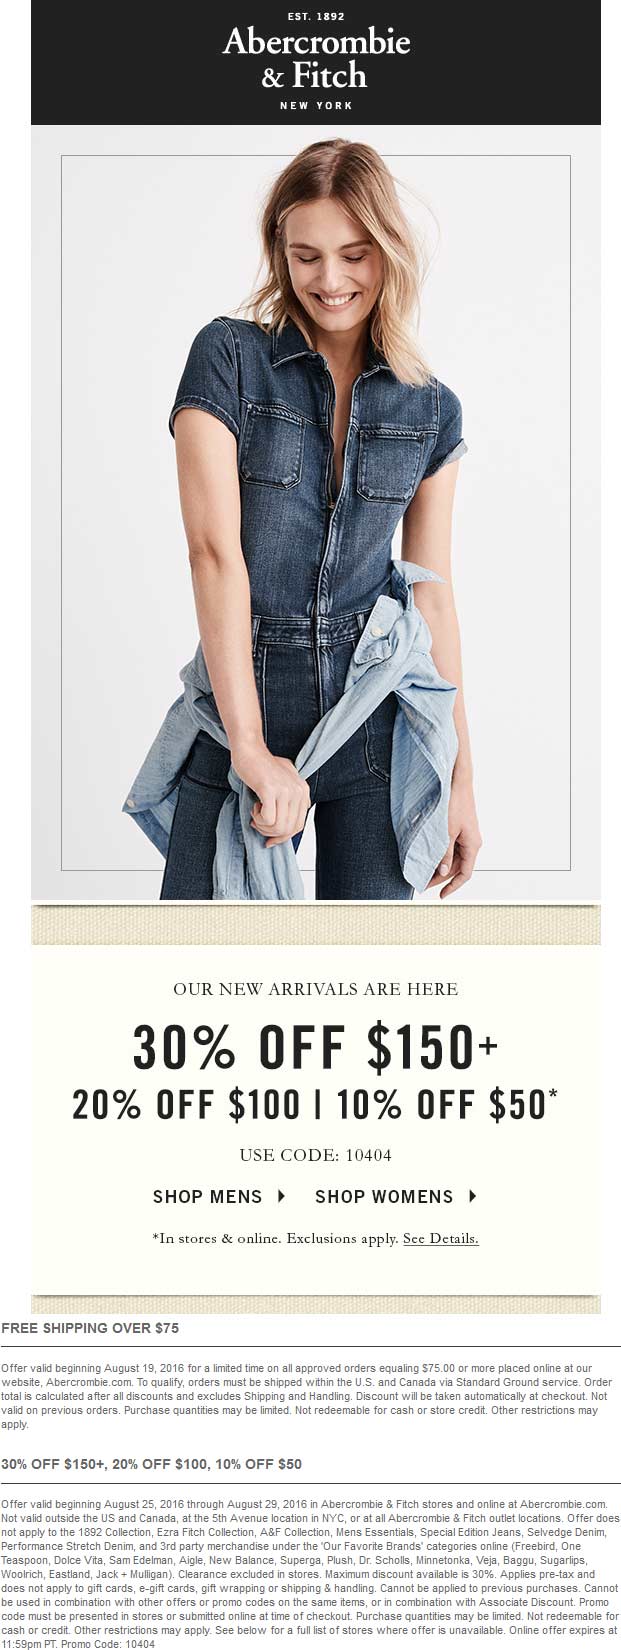 Abercrombie & Fitch Coupon April 2024 10-30% off $50+ at Abercrombie & Fitch, or online via promo code 10404